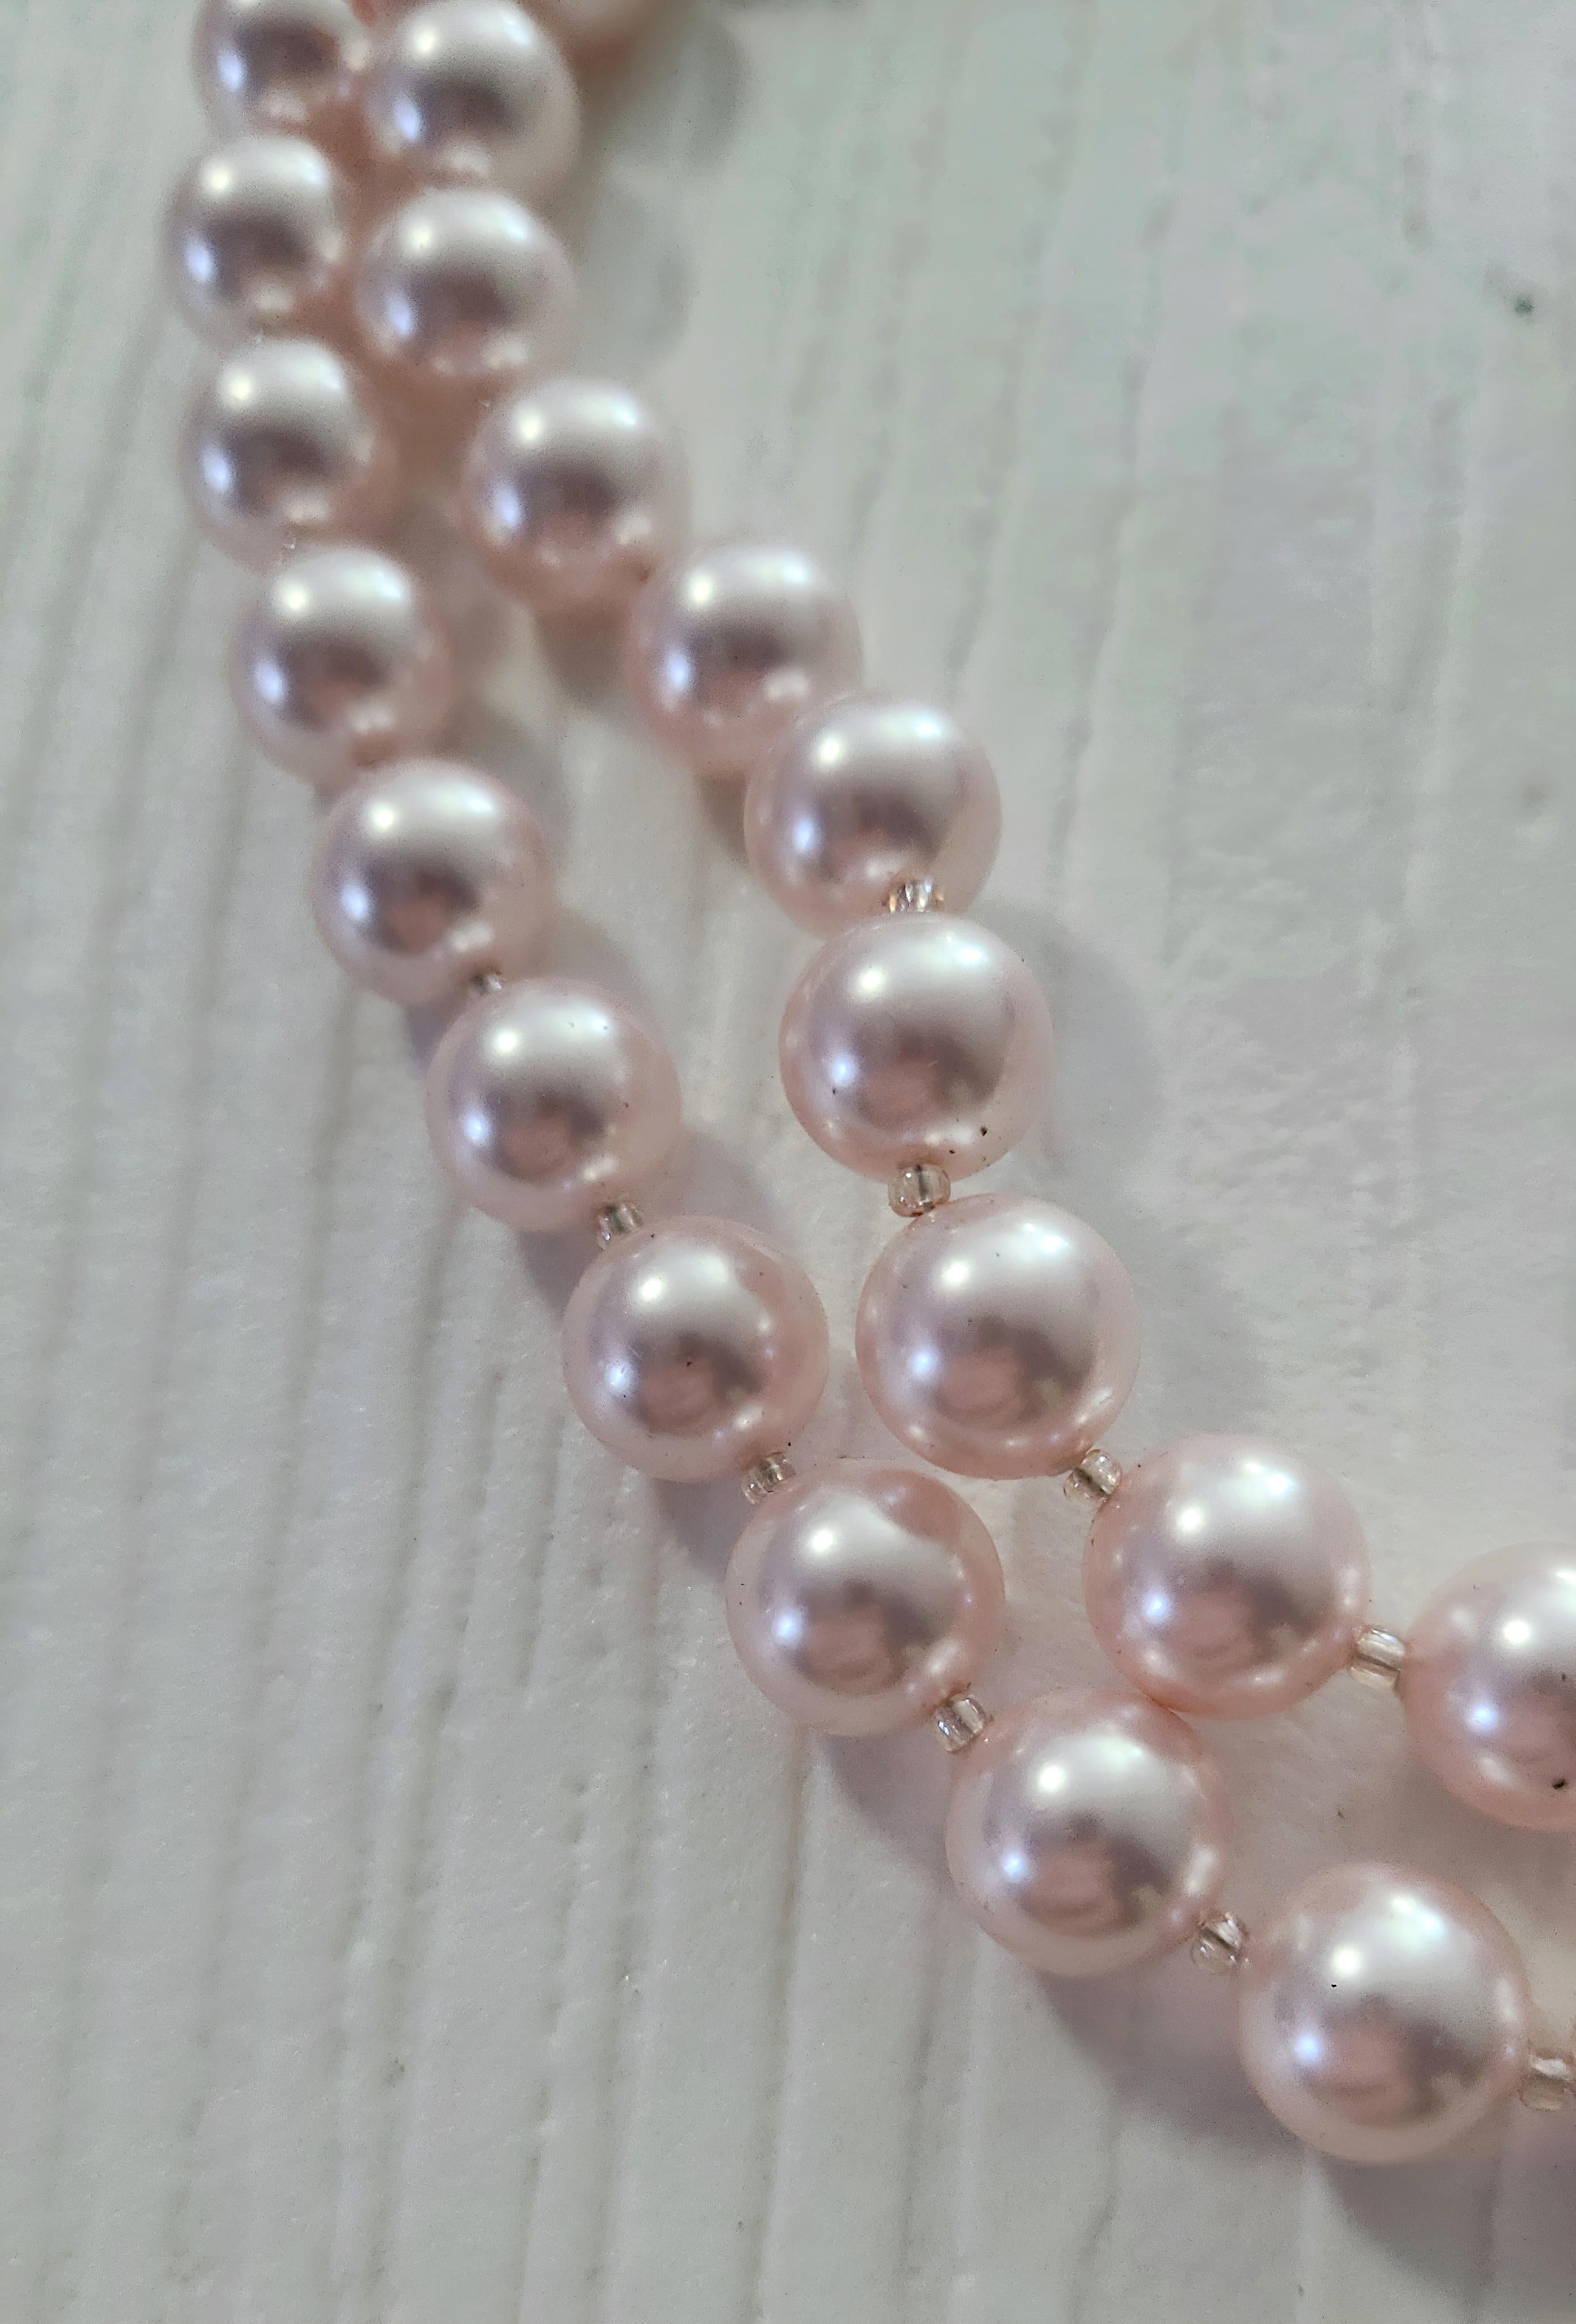 Double stranded pink freshwater pearls, carefully separated by individual translucent glass seed beads, gathered at either end 
with pink lace & velvet tie-up closure. 

Freshwater pearls are real, cultured pearls that are grown in lakes, rivers,